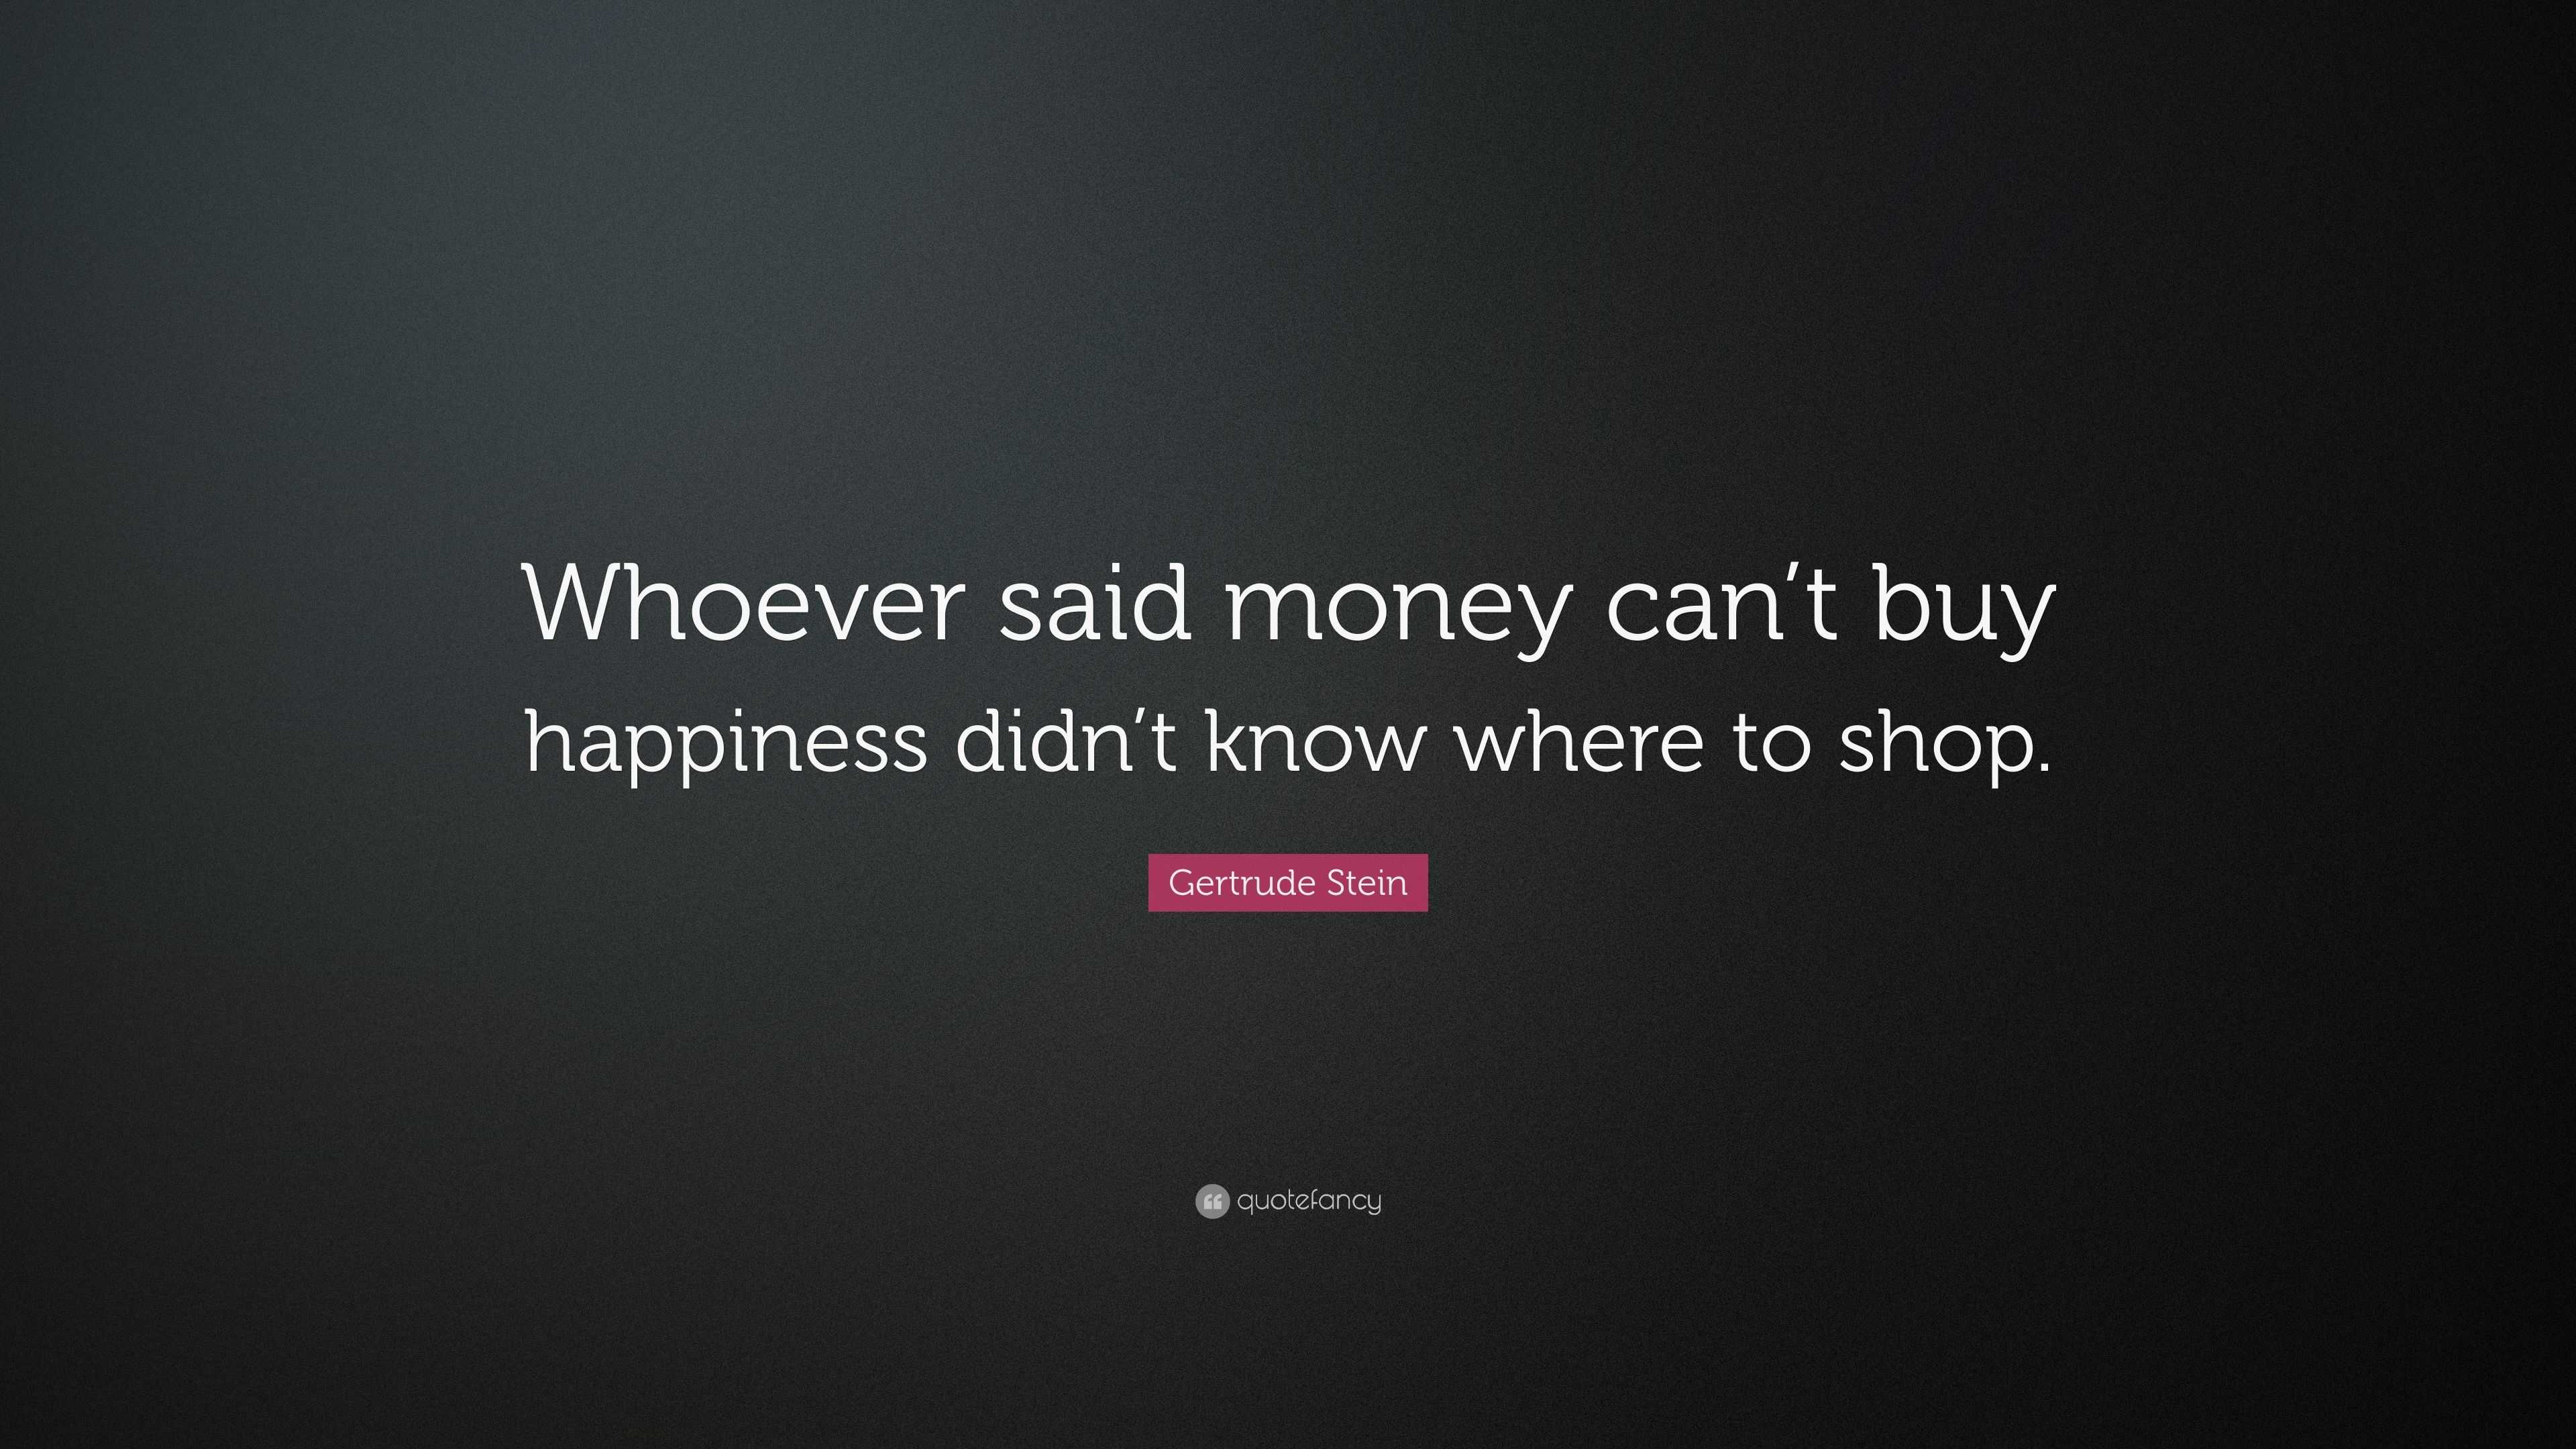 Gertrude Stein Quote: “Whoever said money can’t buy happiness didn’t